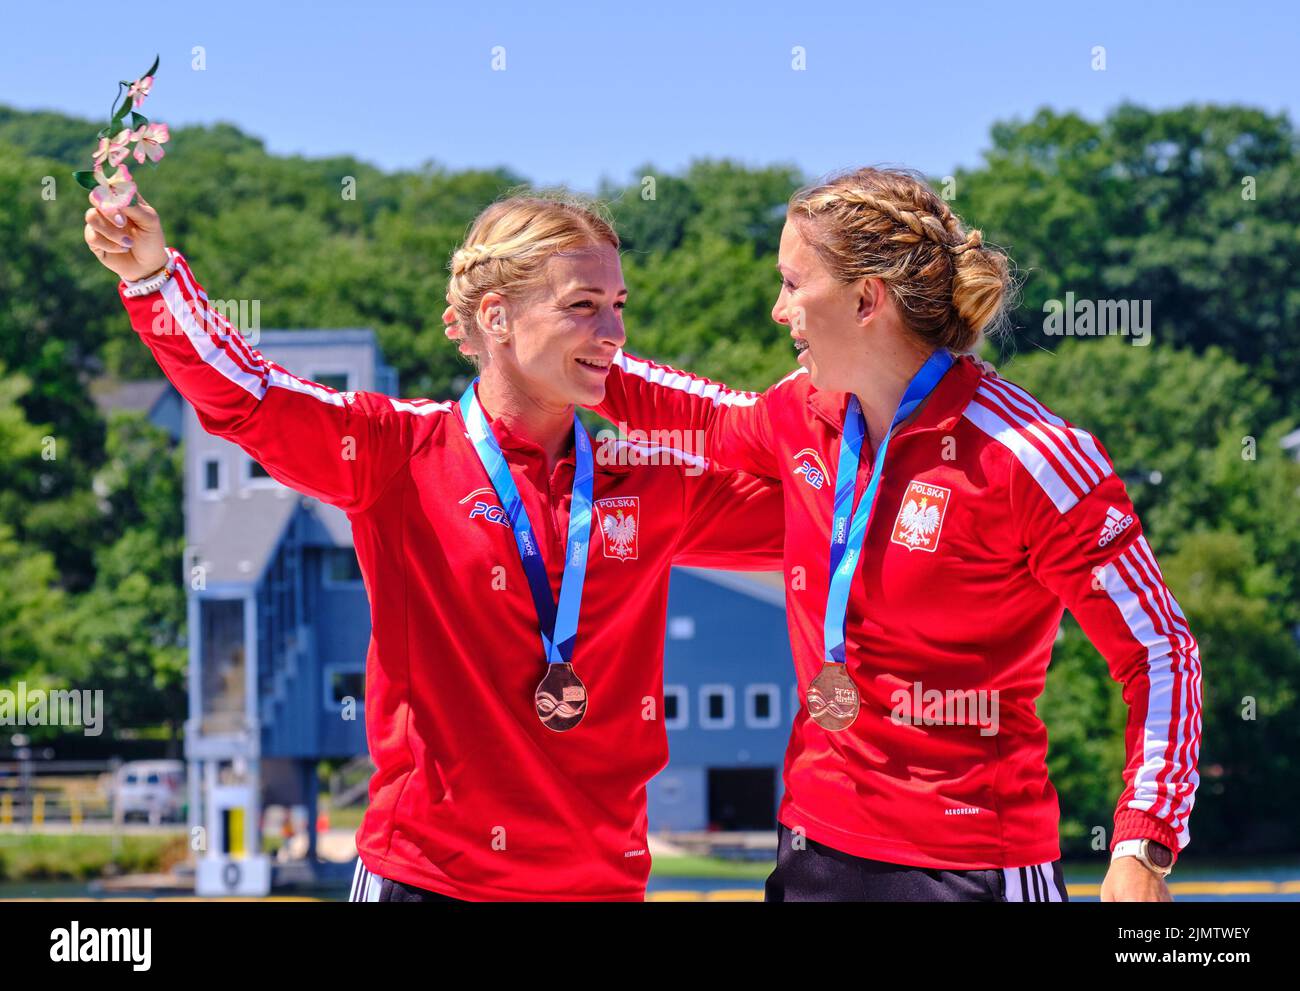 Dartmouth, Canada. August 7th, 2022. Gold Medalists and World Champion Karolina Naja and Anna Pulawska from Poland receive their medal in the K2 Women 500m event which they won close race over Germany, Belgium taking the Bronze. The 2022 ICF Canoe Sprint and Paracanoe World Championships takes place on Lake Banook in Dartmouth (Halifax). Credit: meanderingemu/Alamy Live News Stock Photo